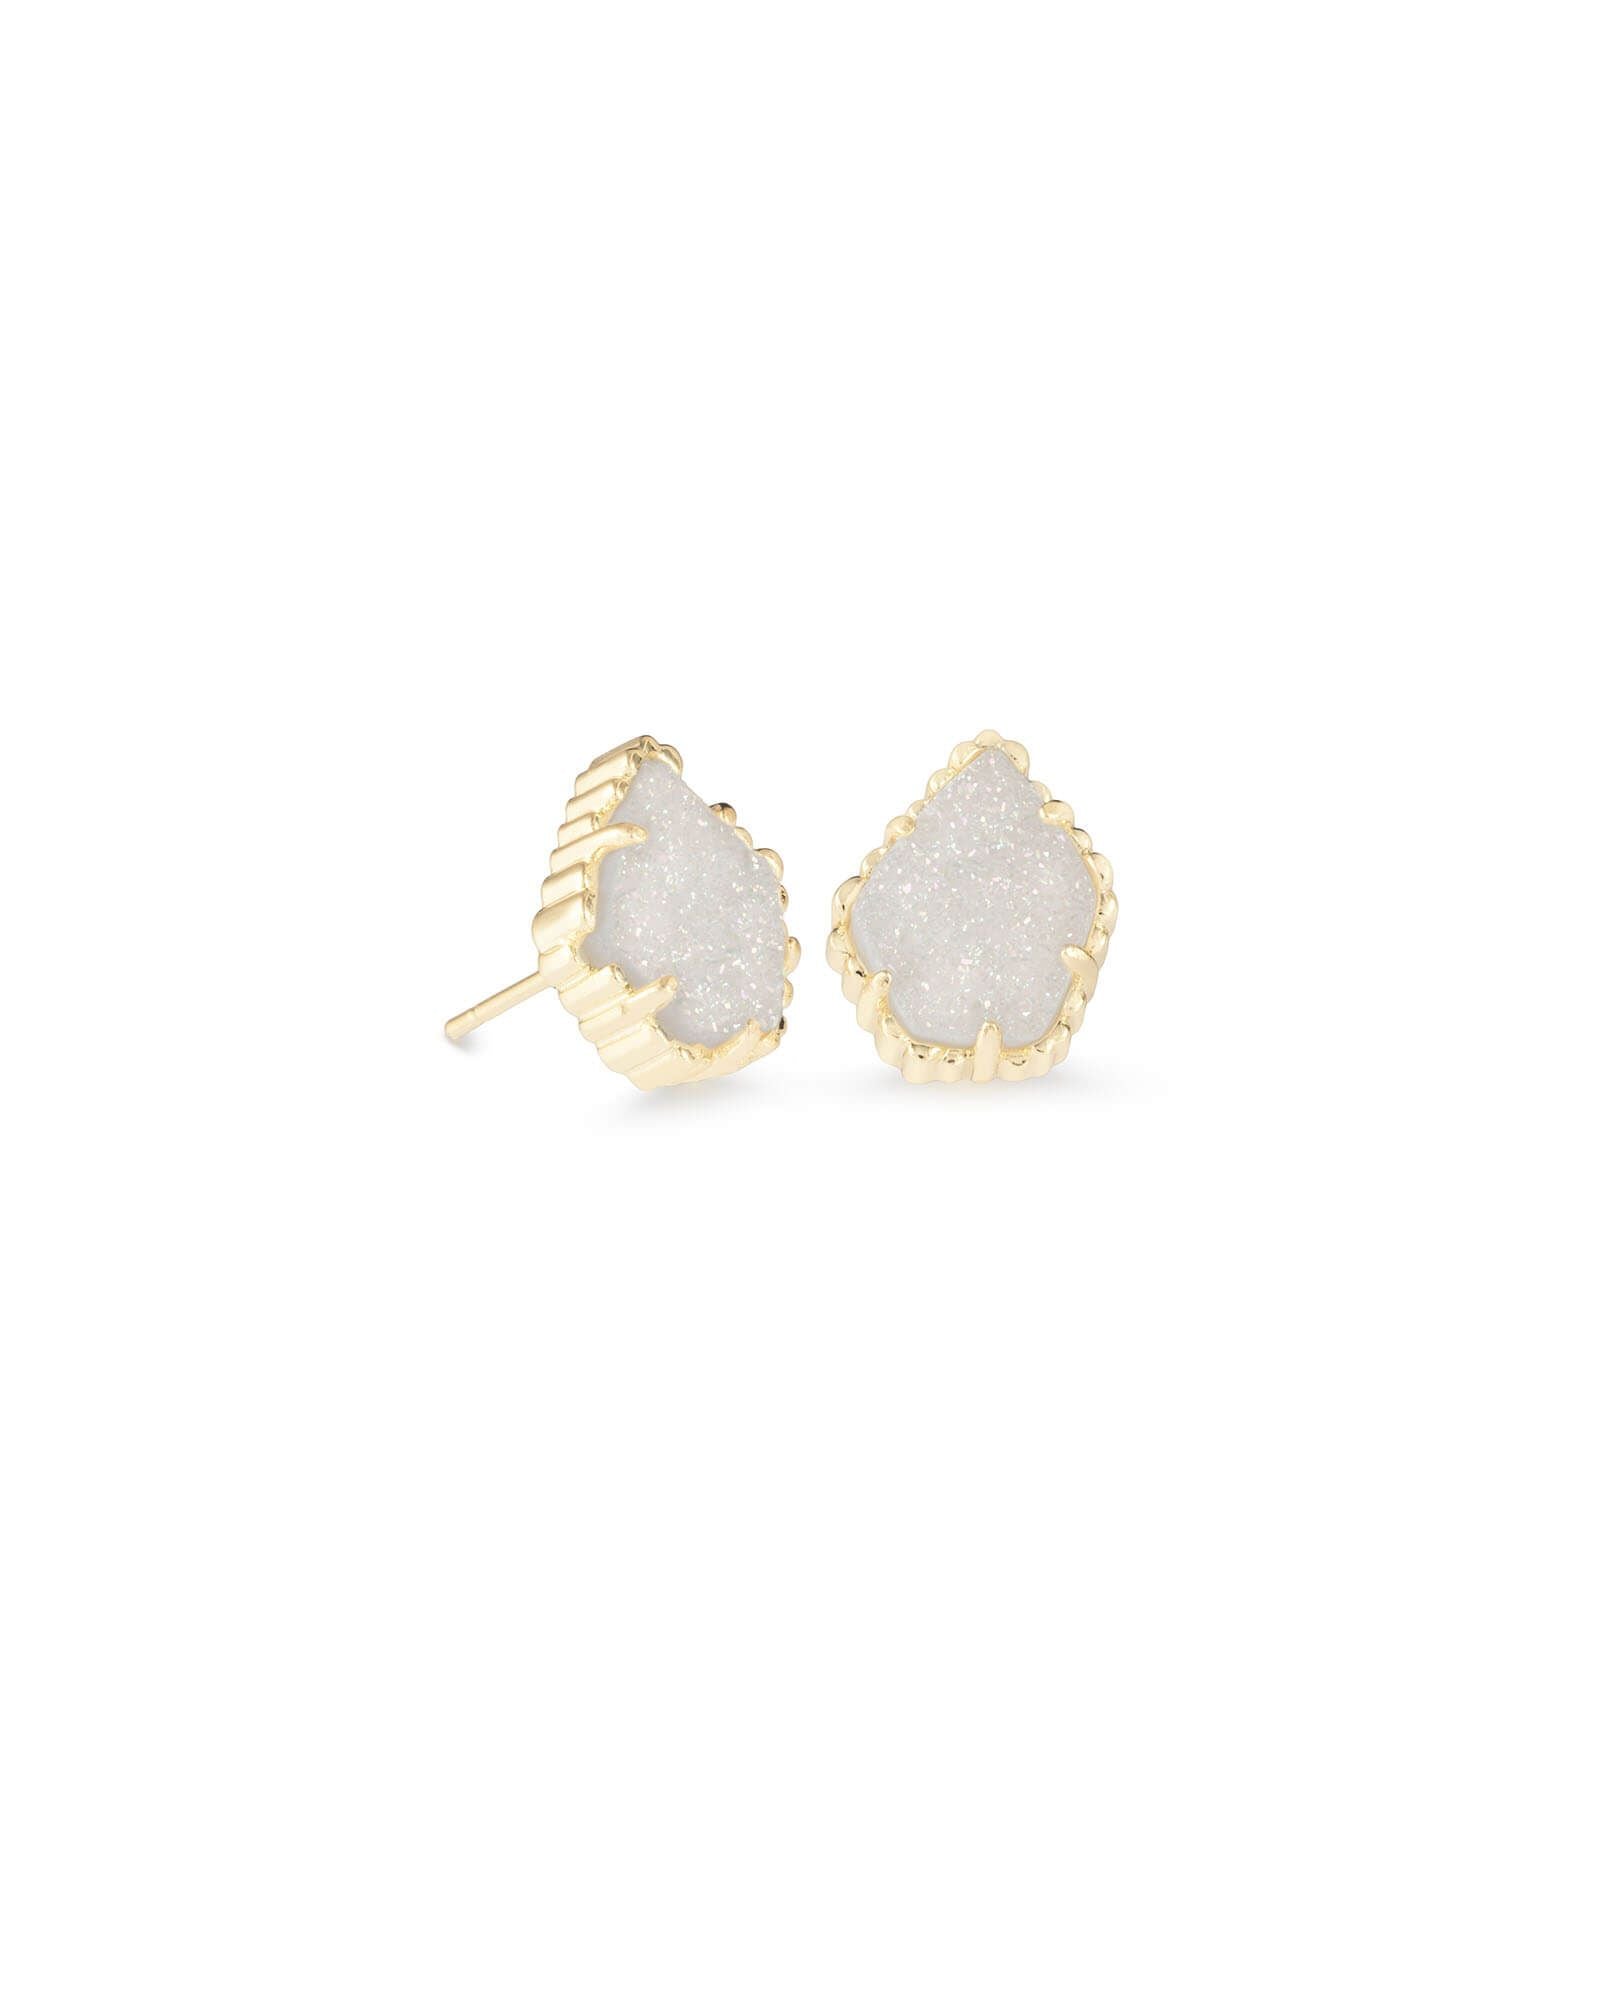 Tessa Stud Earrings Iridescent Drusy Gold or Silver